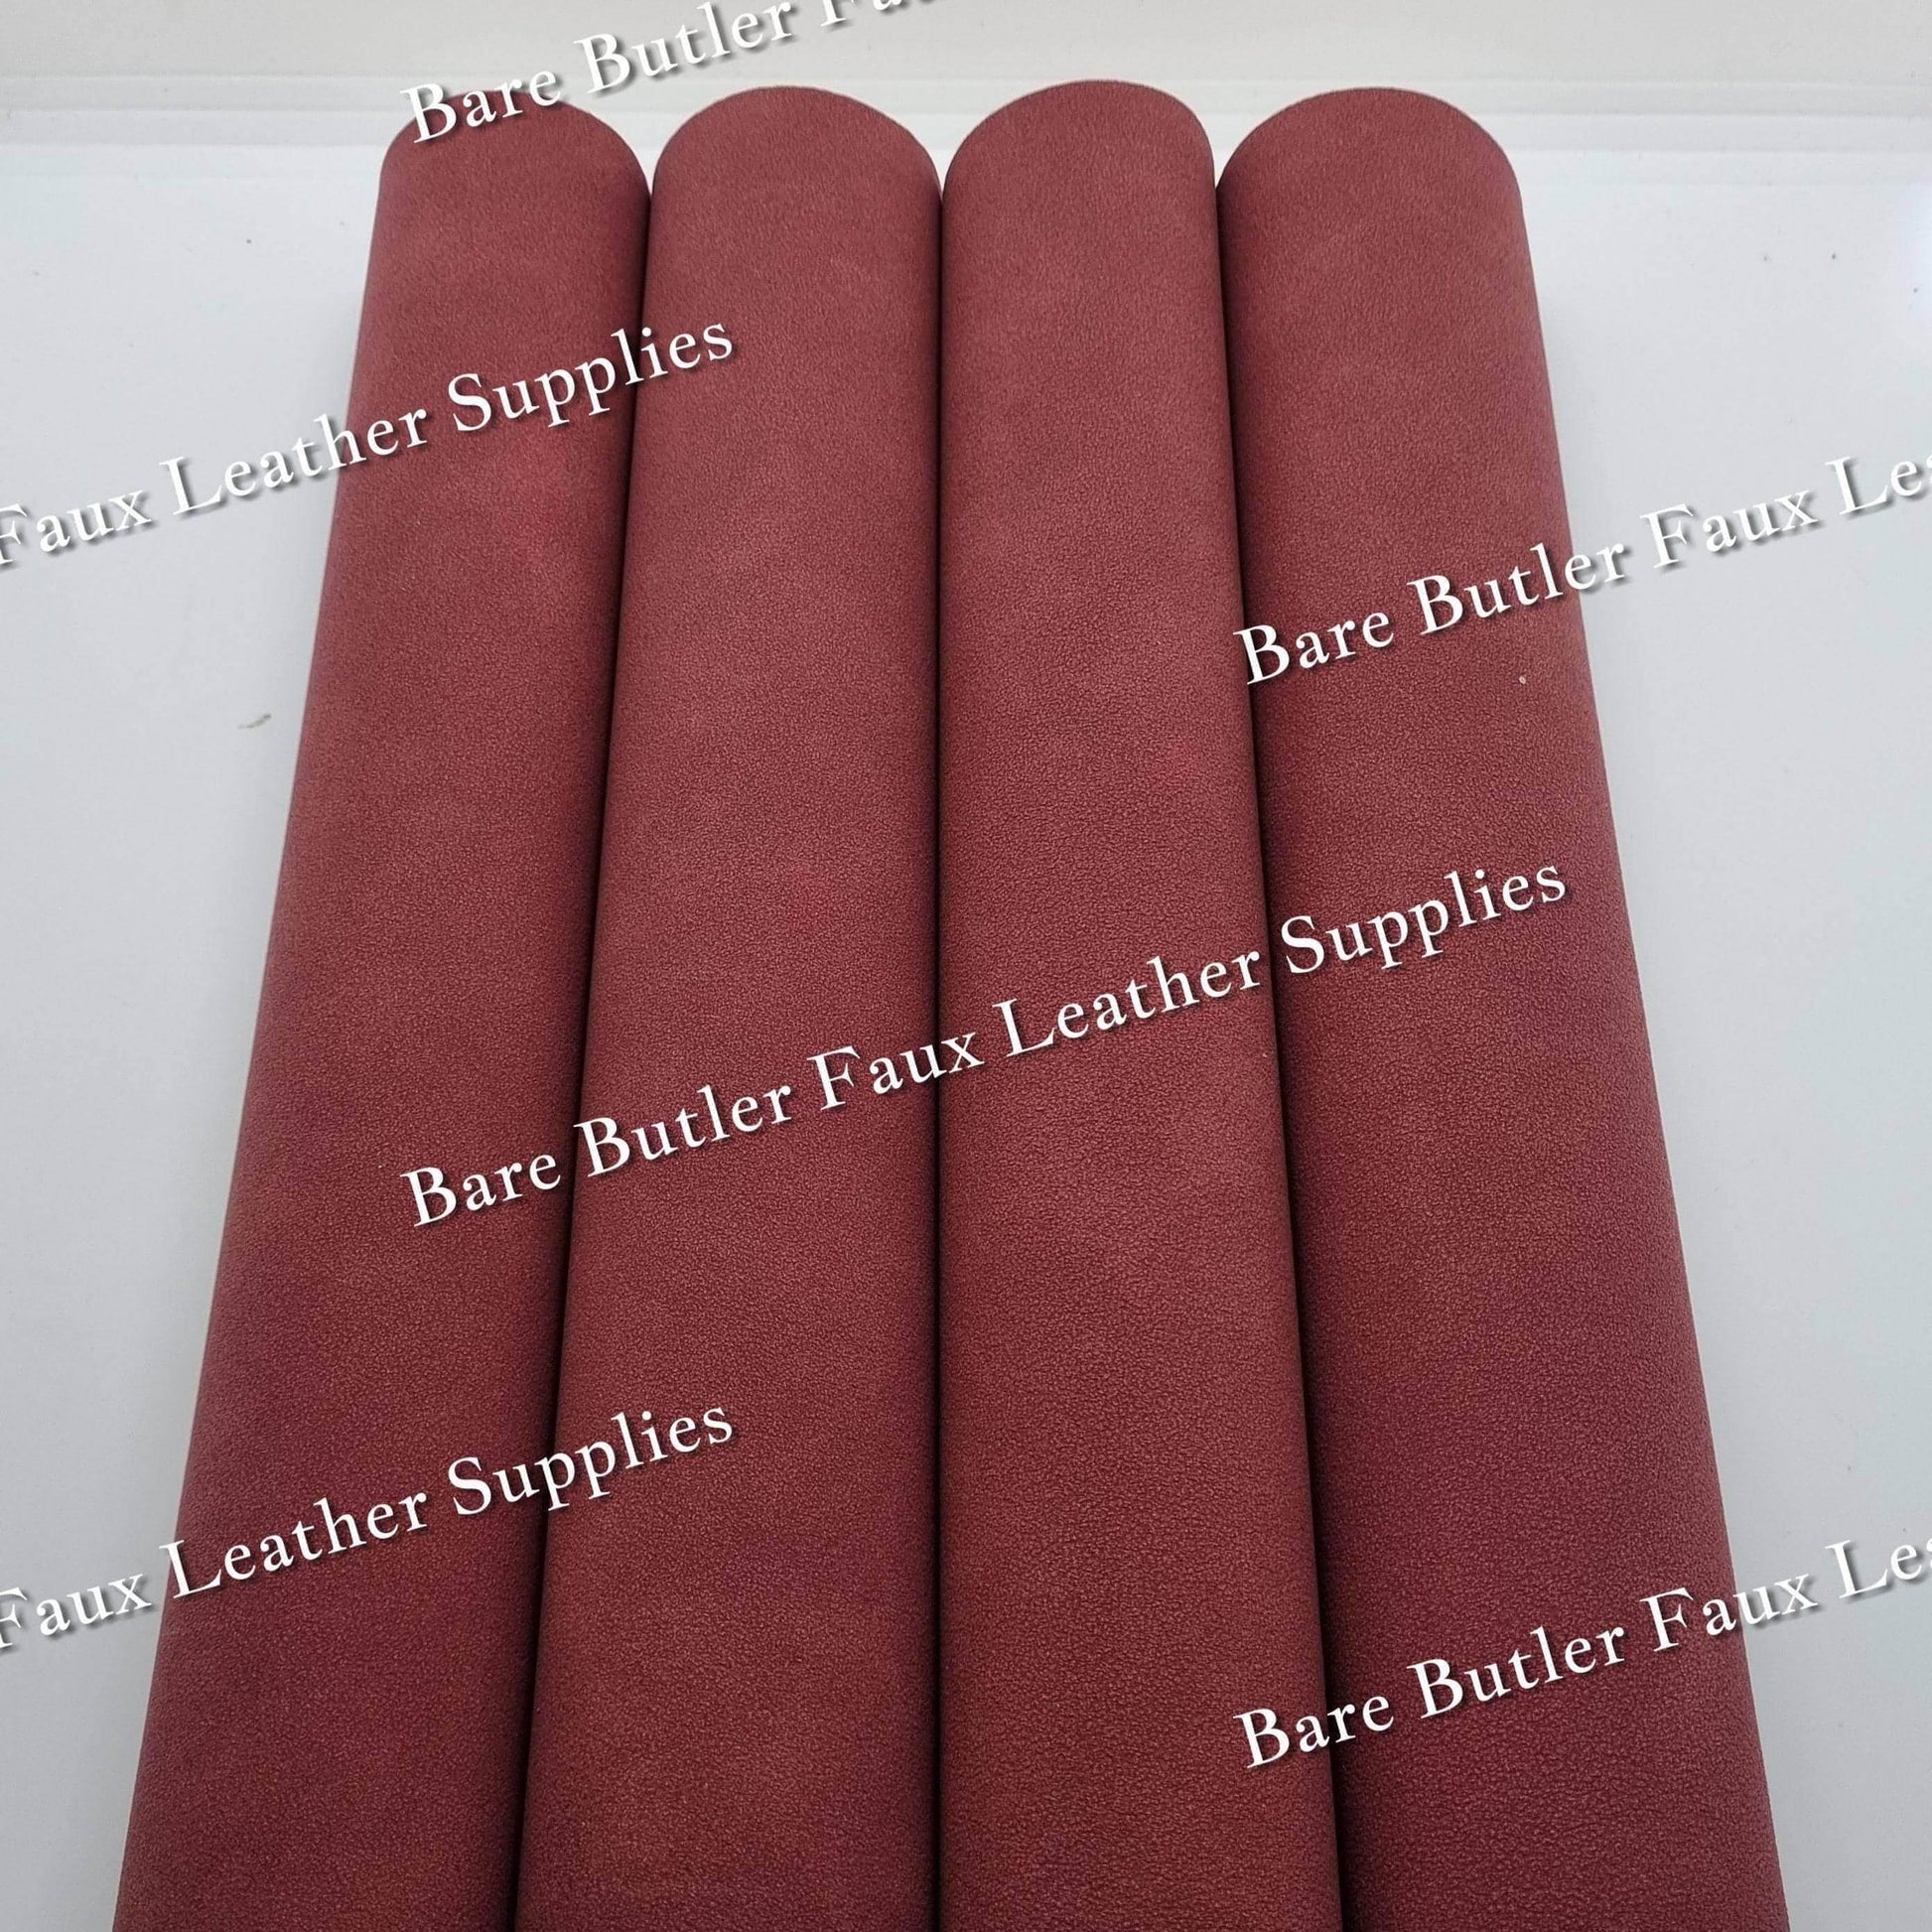 Suede - Burnt Red - Faux, Faux Leather, Suede - Bare Butler Faux Leather Supplies 